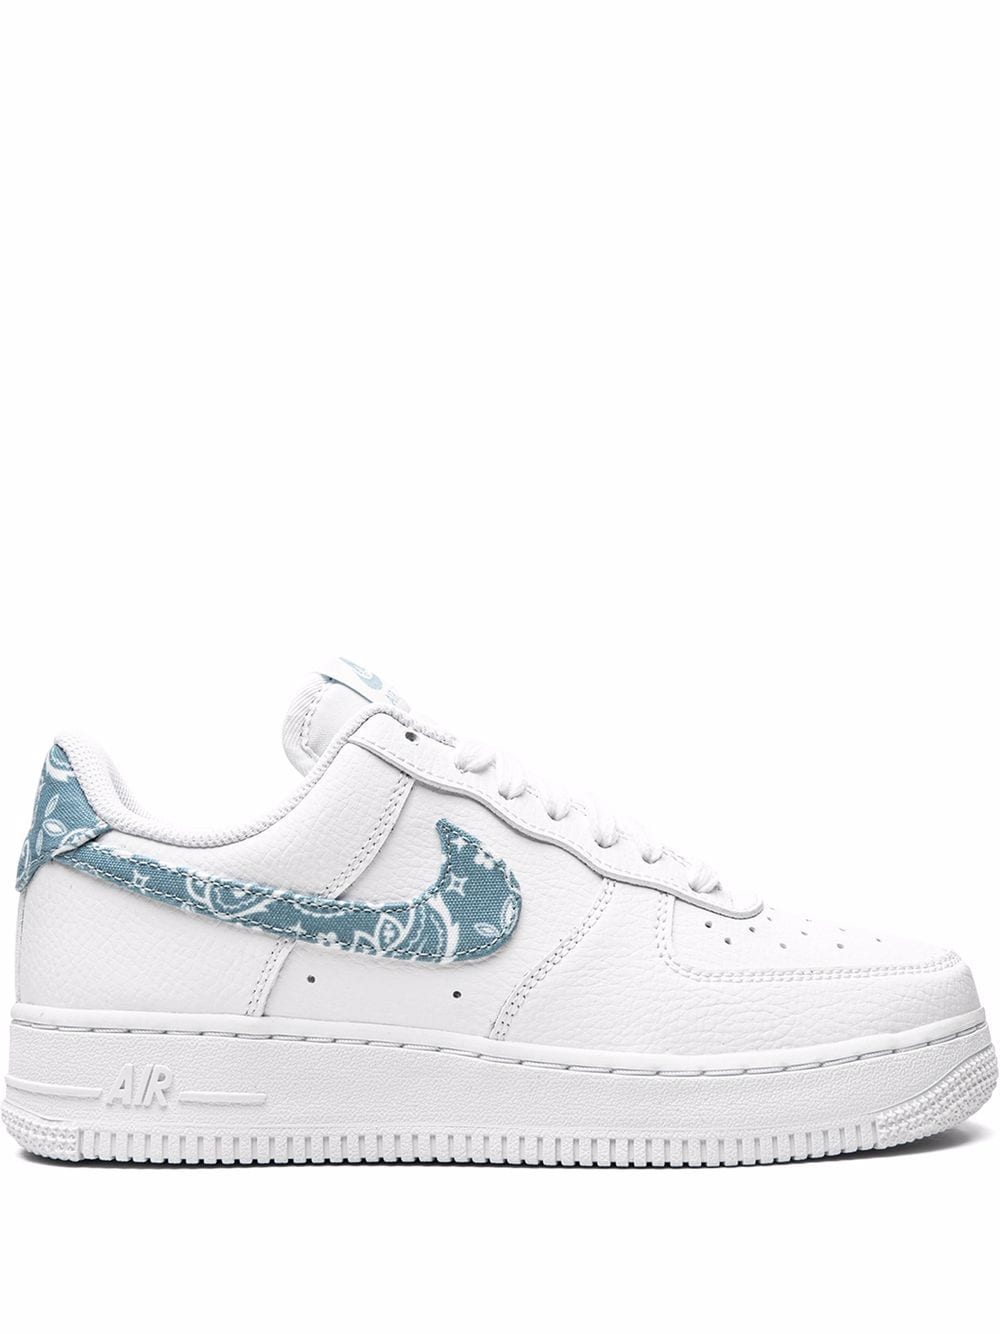 Image 1 of Nike baskets Air Force 1 '07 ESS